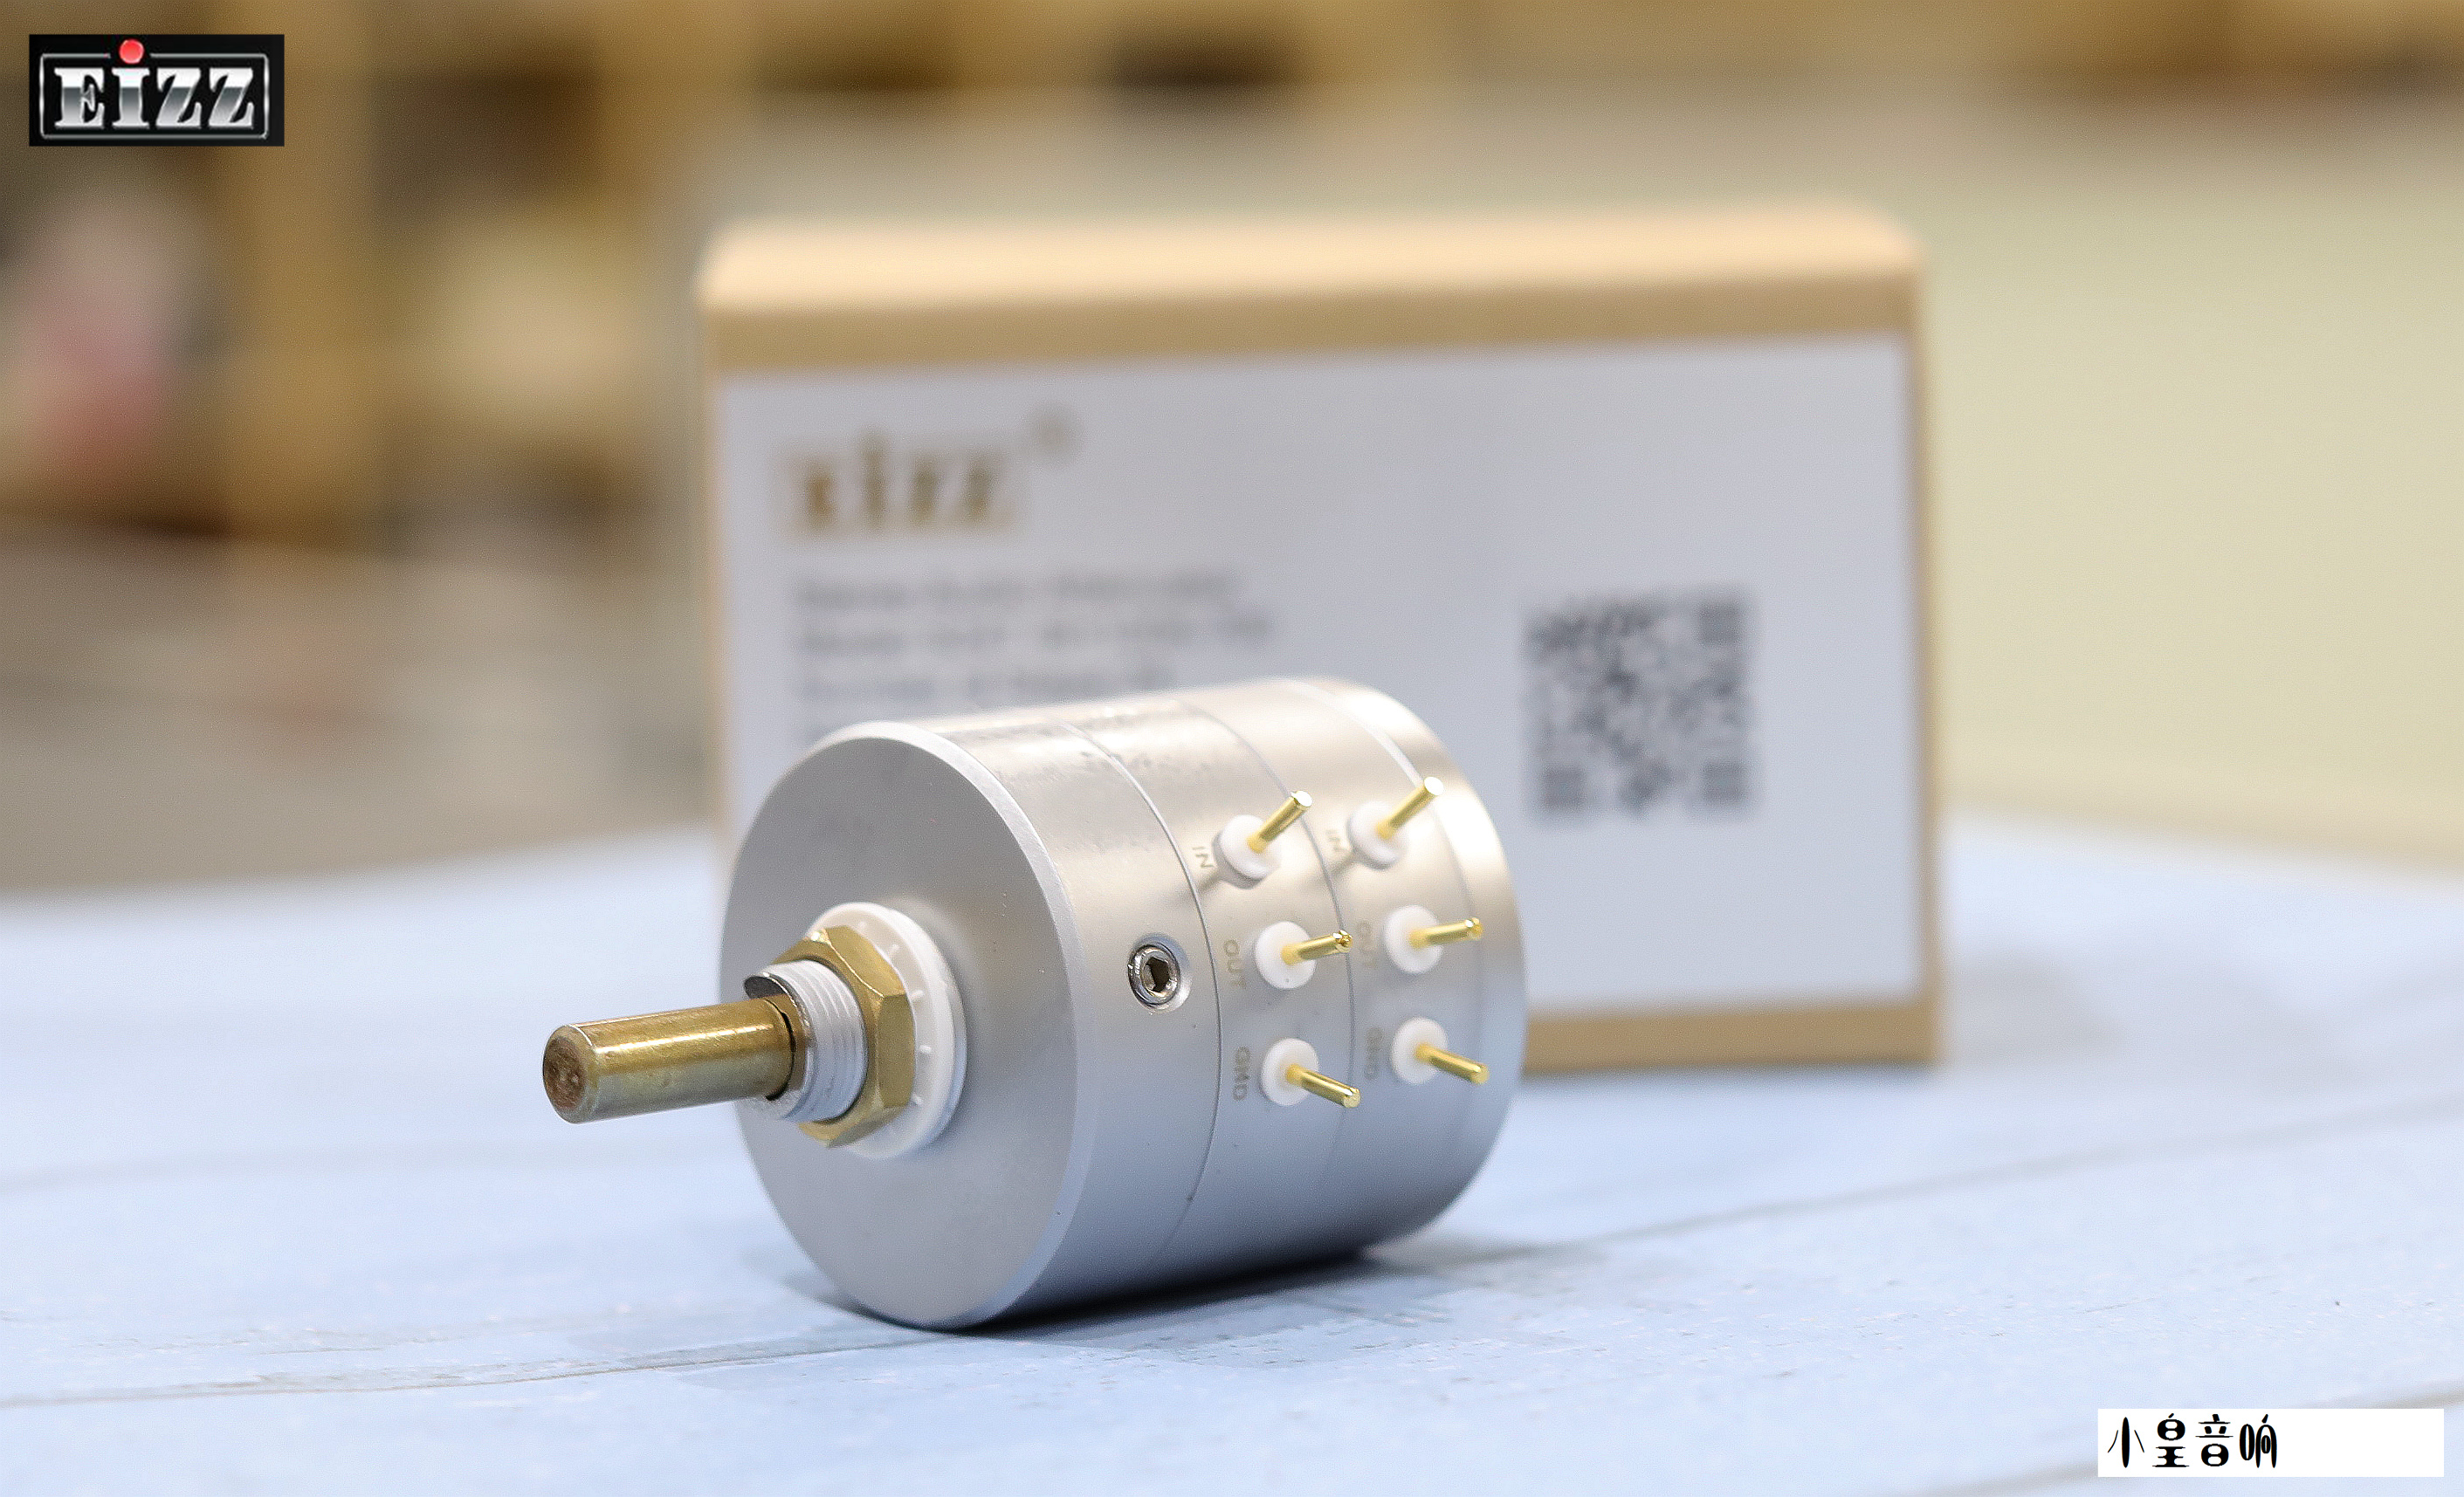 EIZZ 24 high-precision stepping potentiometer with gold-plated 